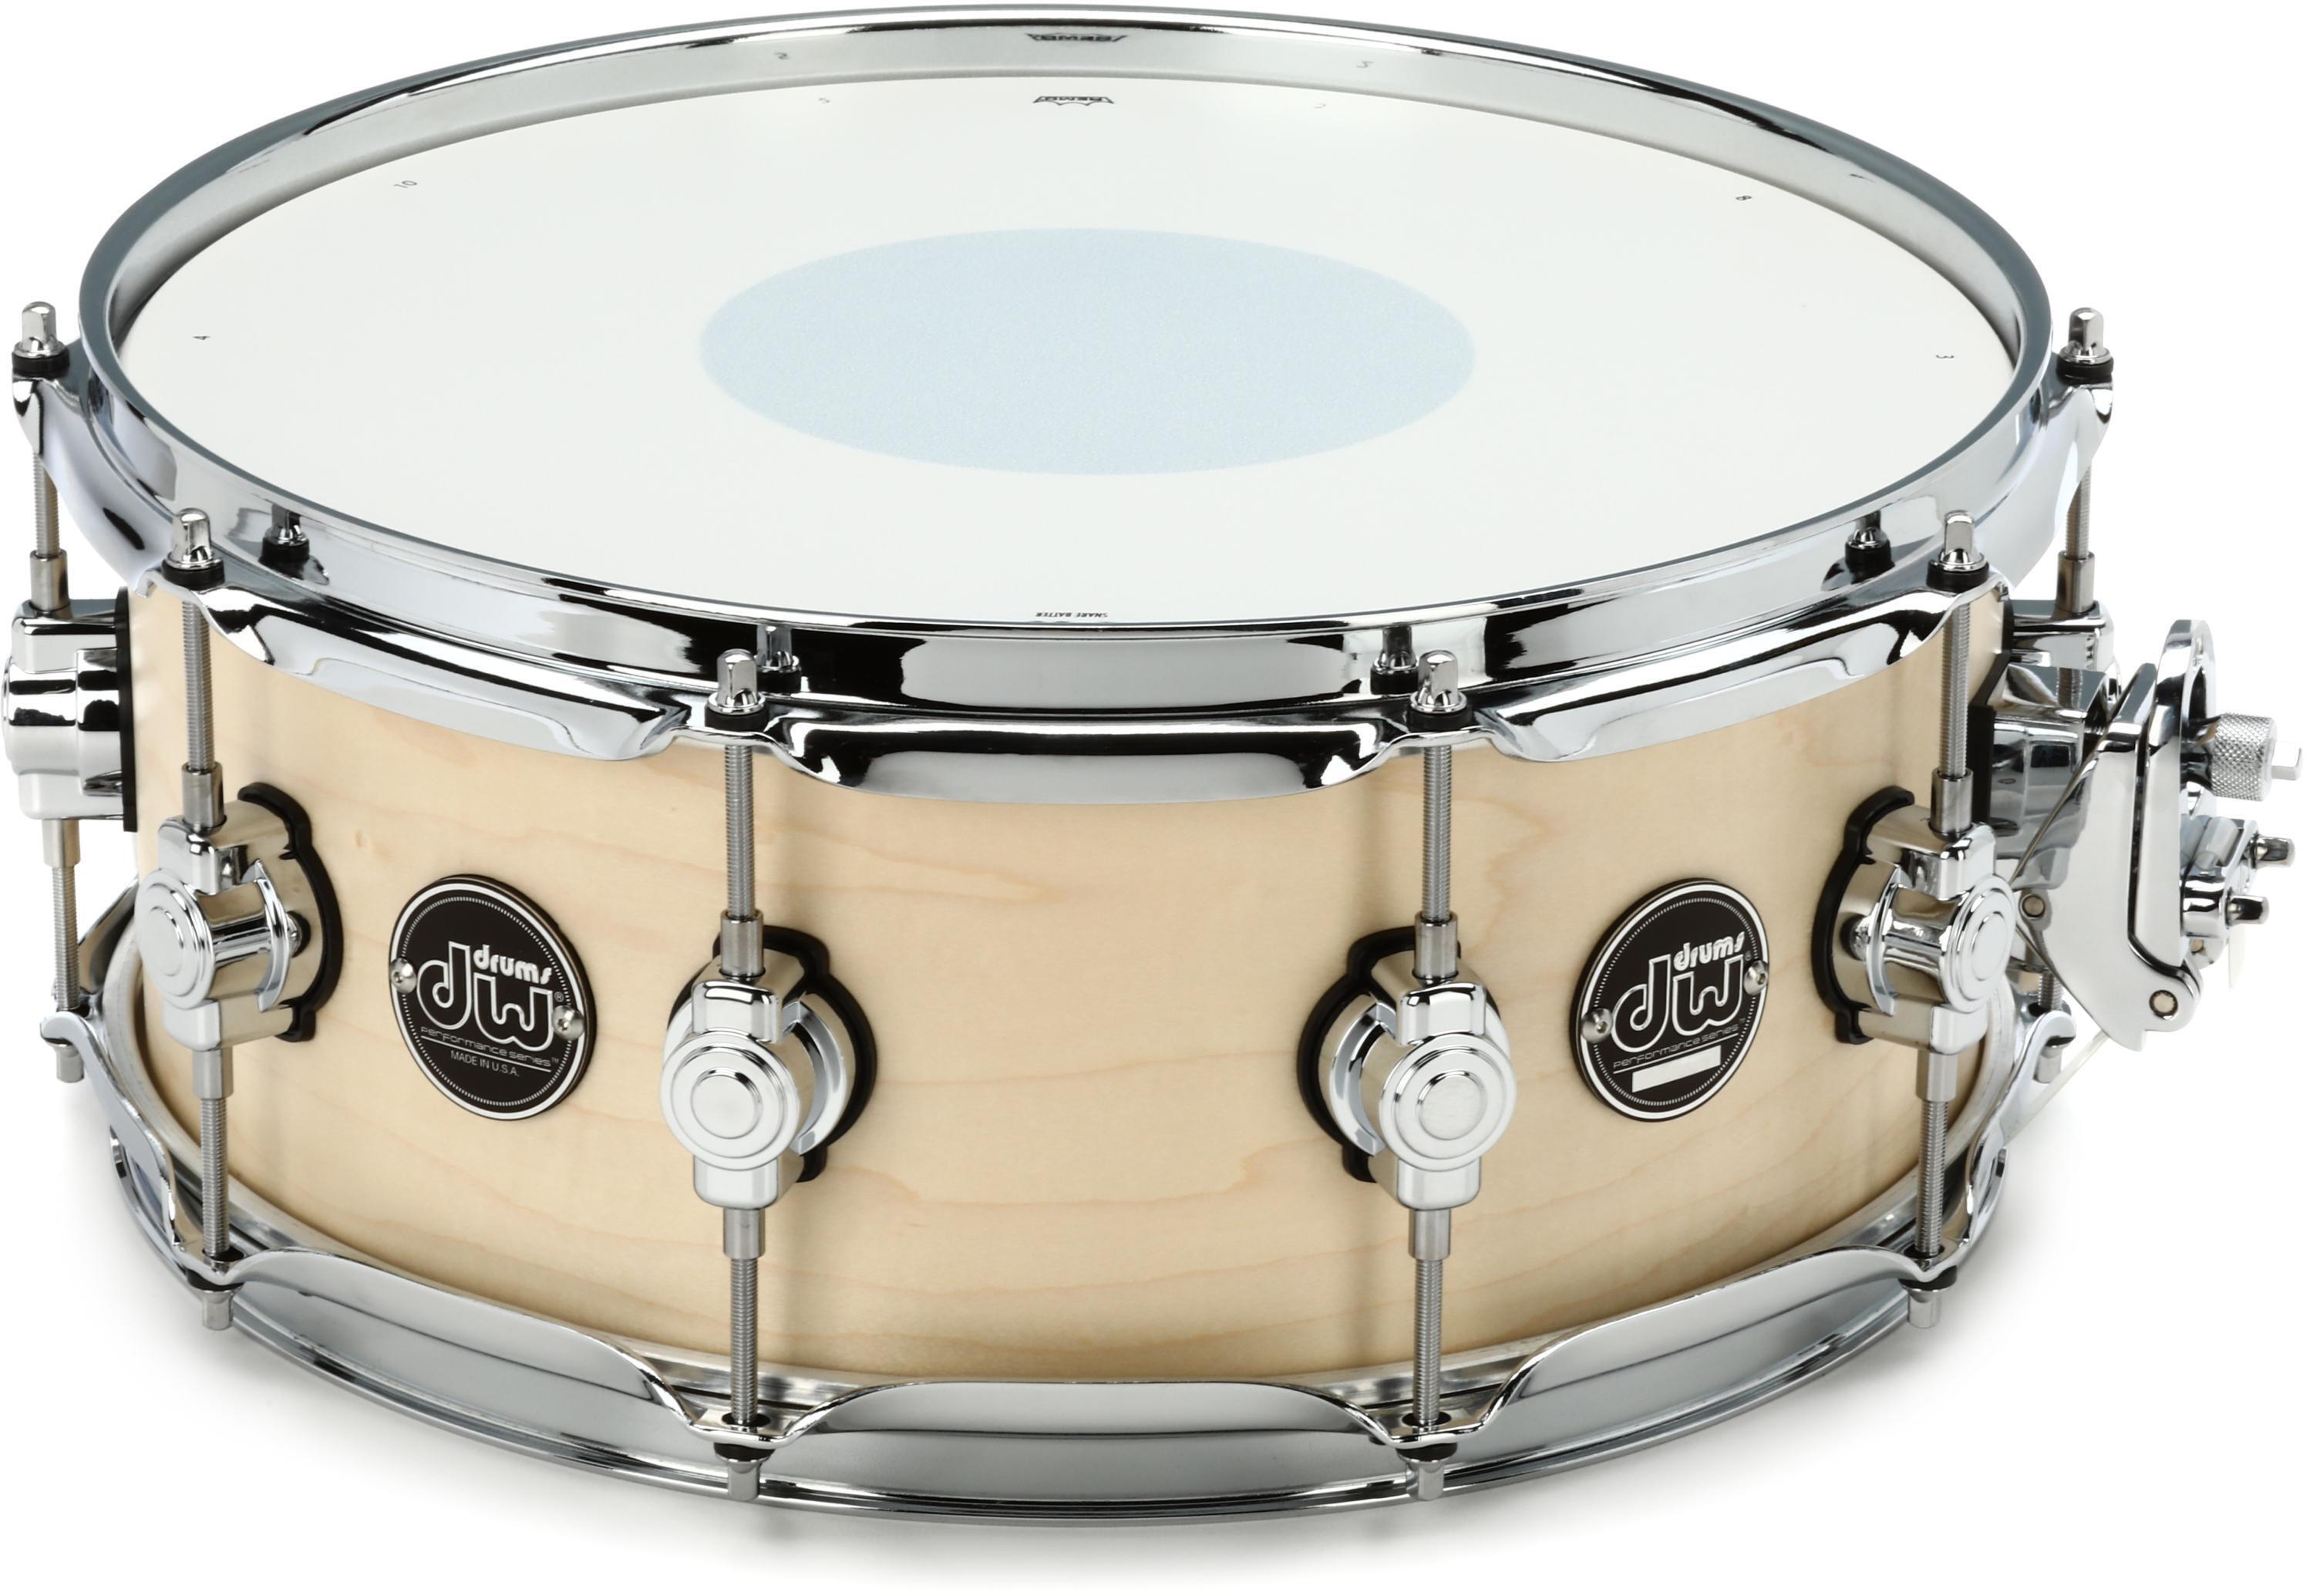 DW Performance Series Snare Drum - 5.5 x 14 inch - Natural Satin Oil -  Sweetwater Exclusive